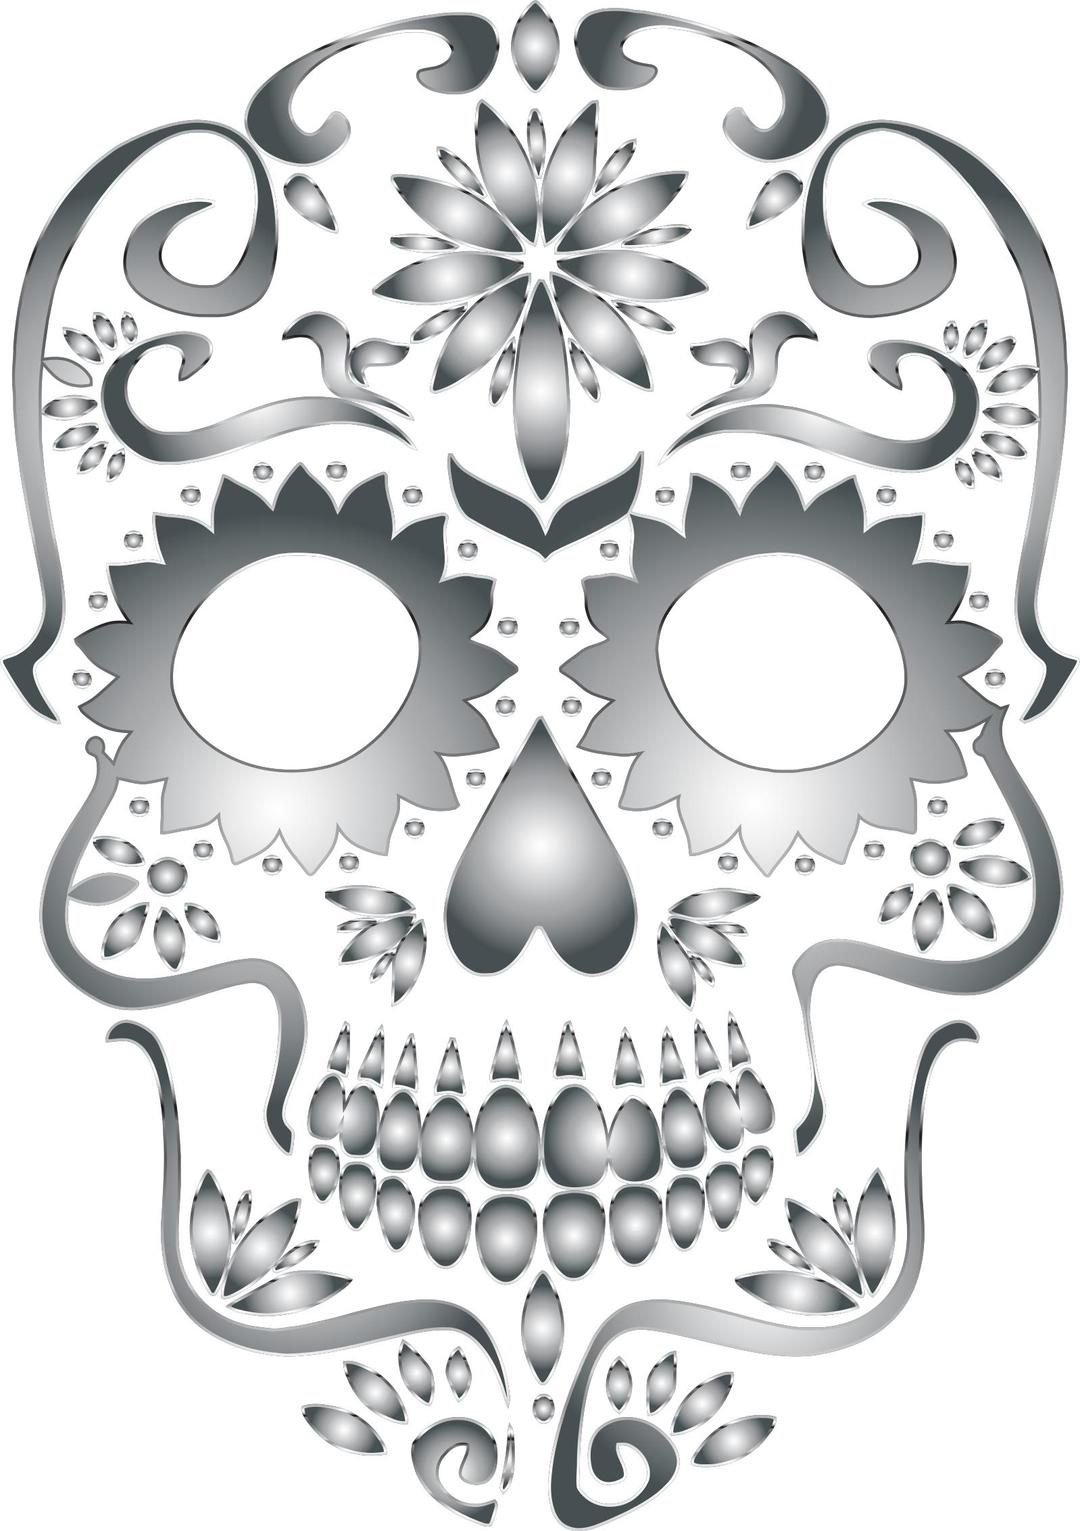 Stainless Steel Sugar Skull Silhouette No Background png transparent